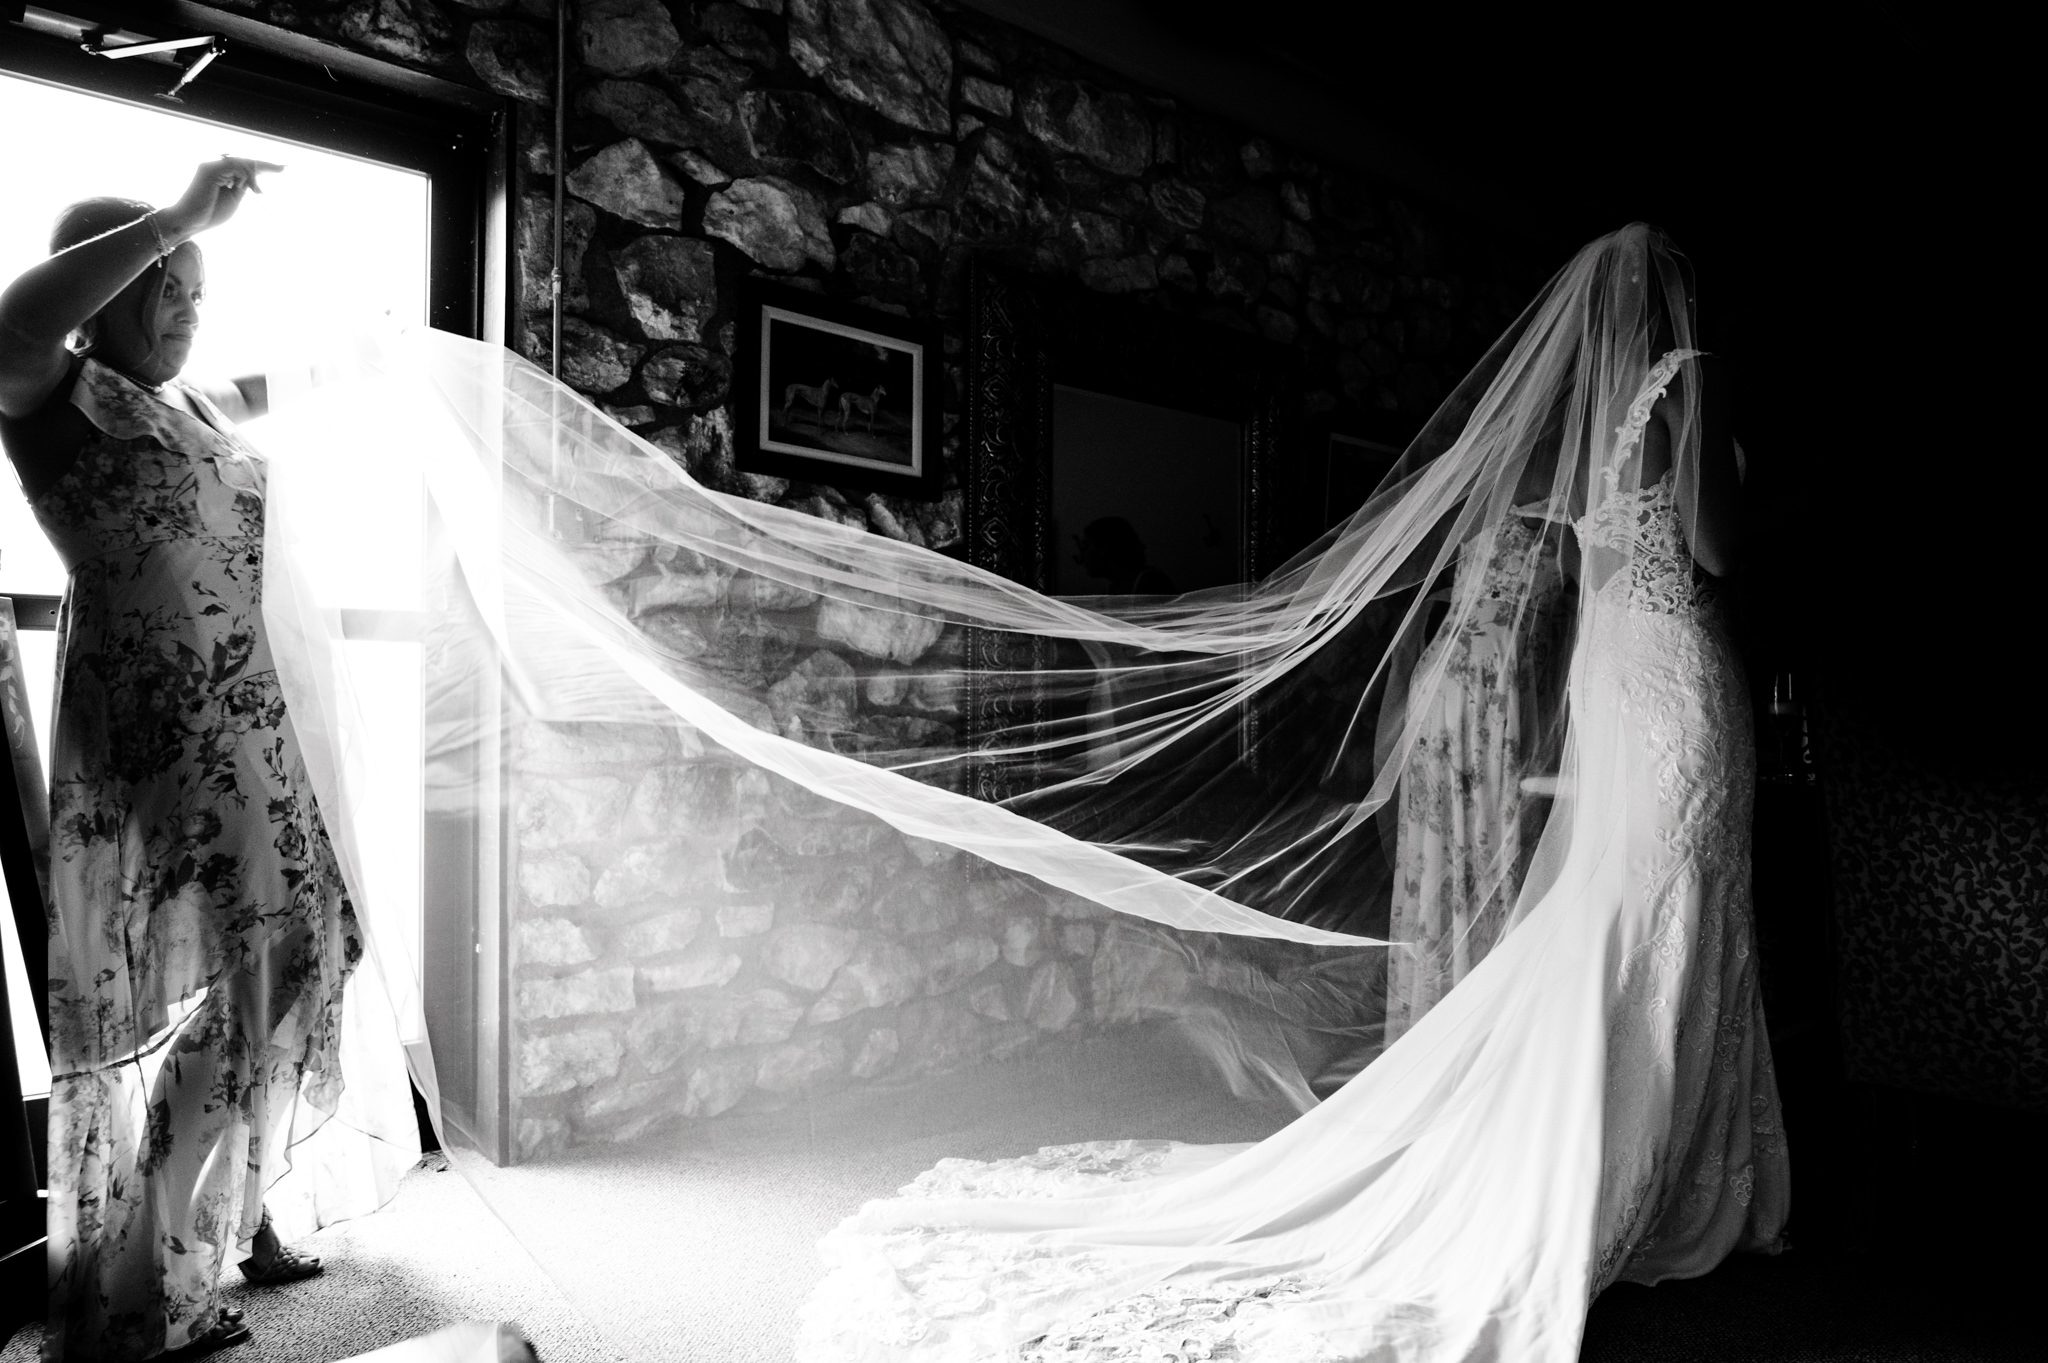 In a crest pavilion, a bride is getting ready for her wedding day, adorned with a veil, captured by a documentary wedding photographer.